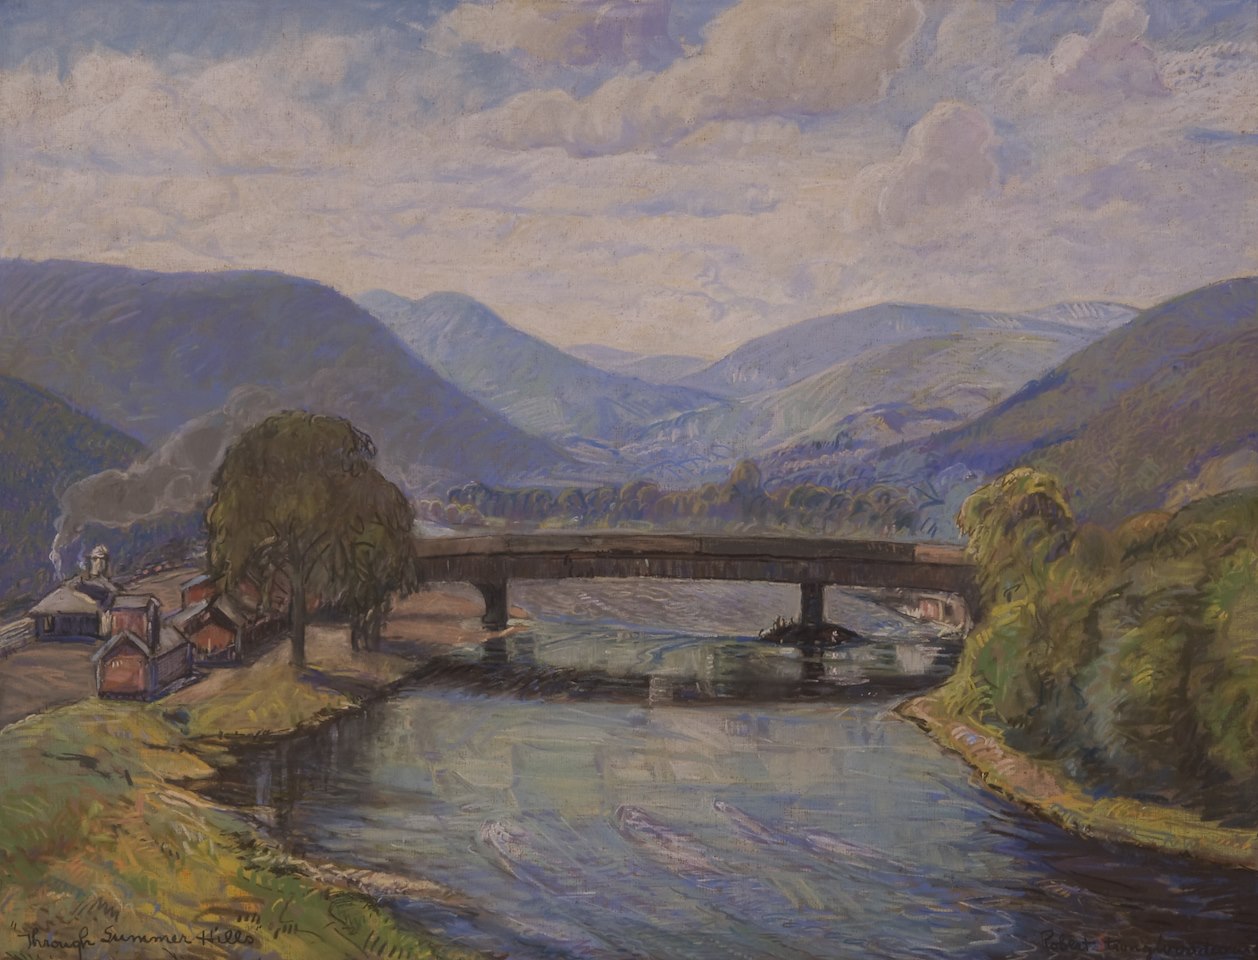 pastel drawing of bridge over river with mountains in background